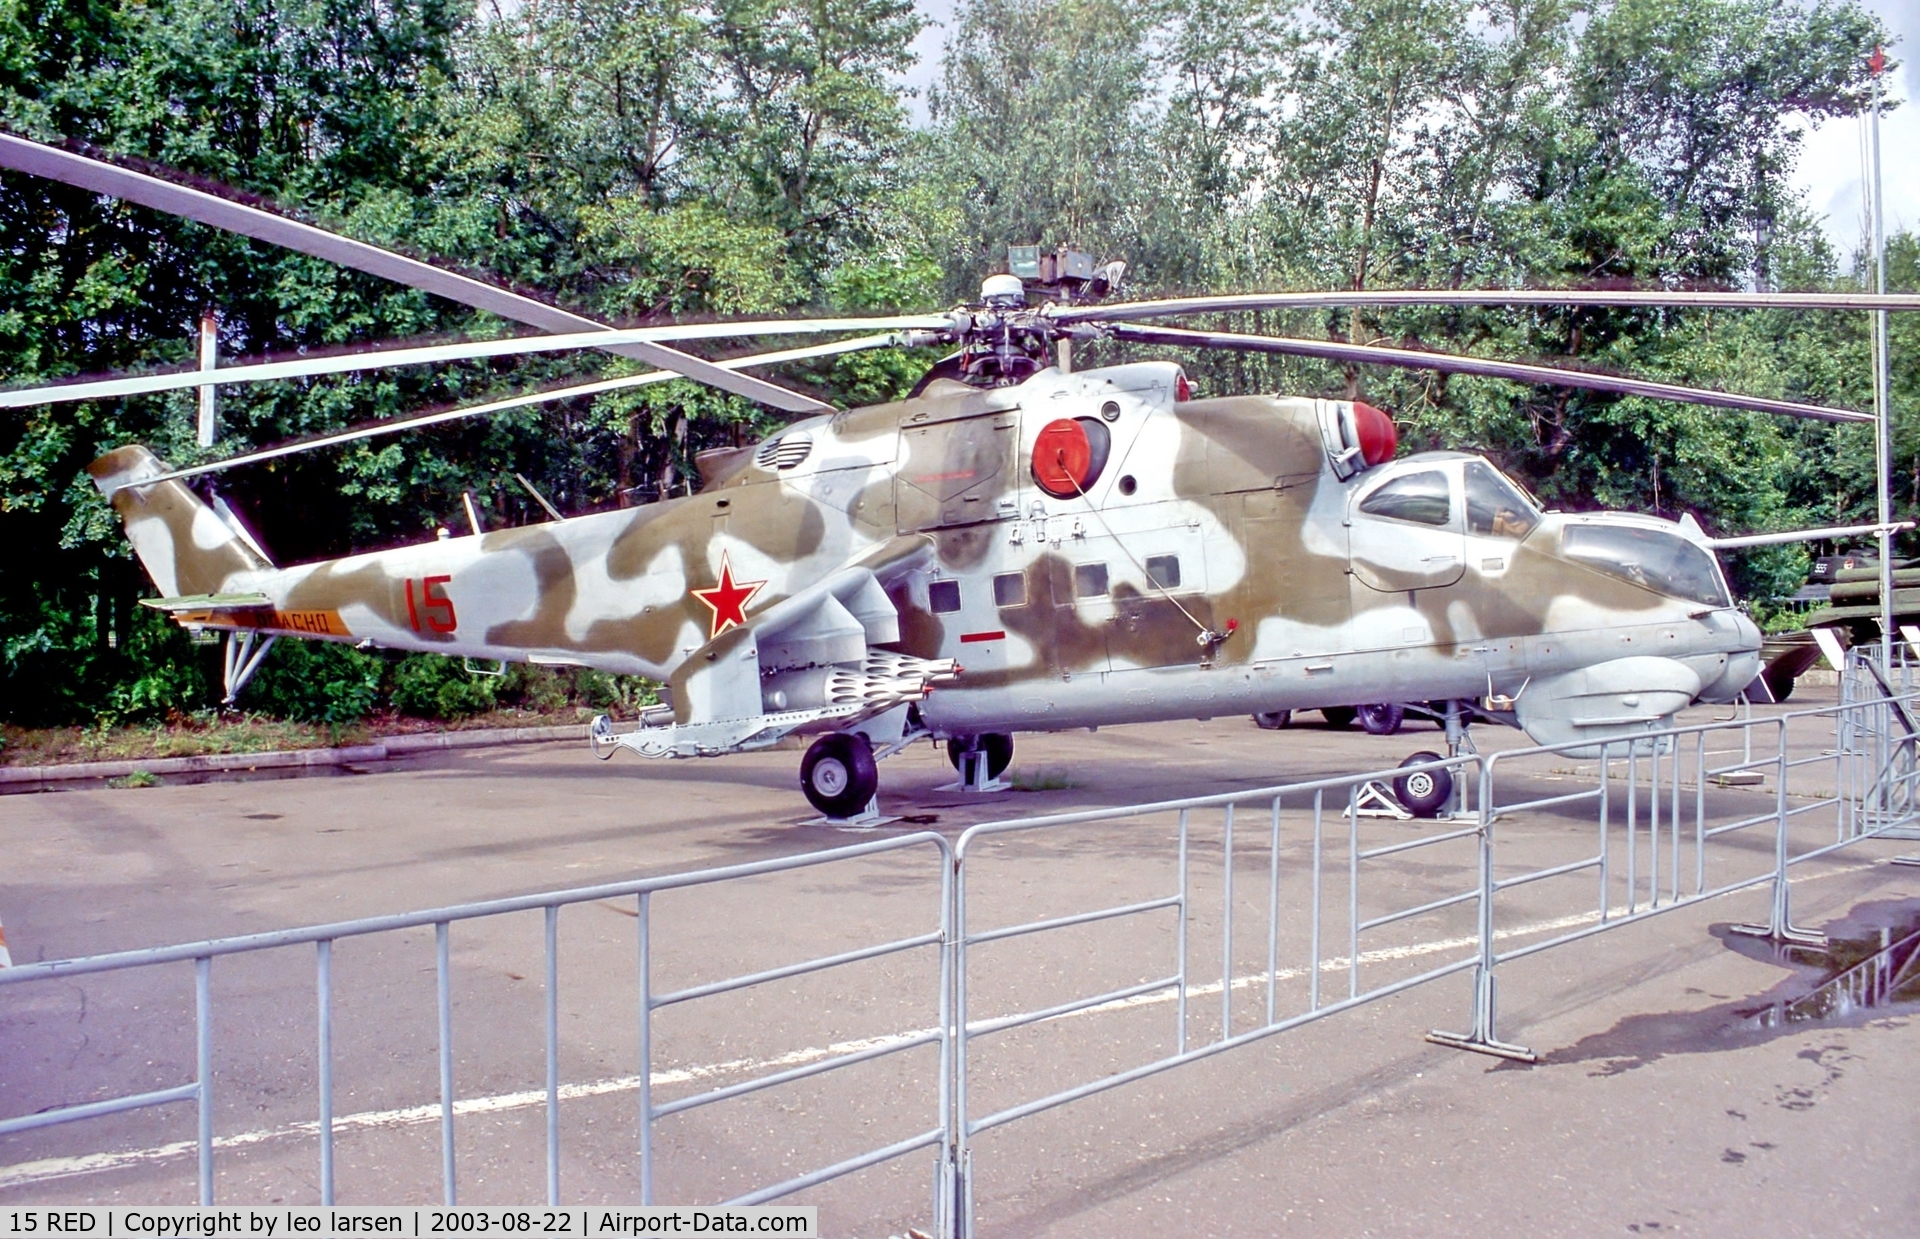 15 RED, Mil Mi-24P C/N 04274, Central Museum of the great patriotic war.Moscow
22.8.03